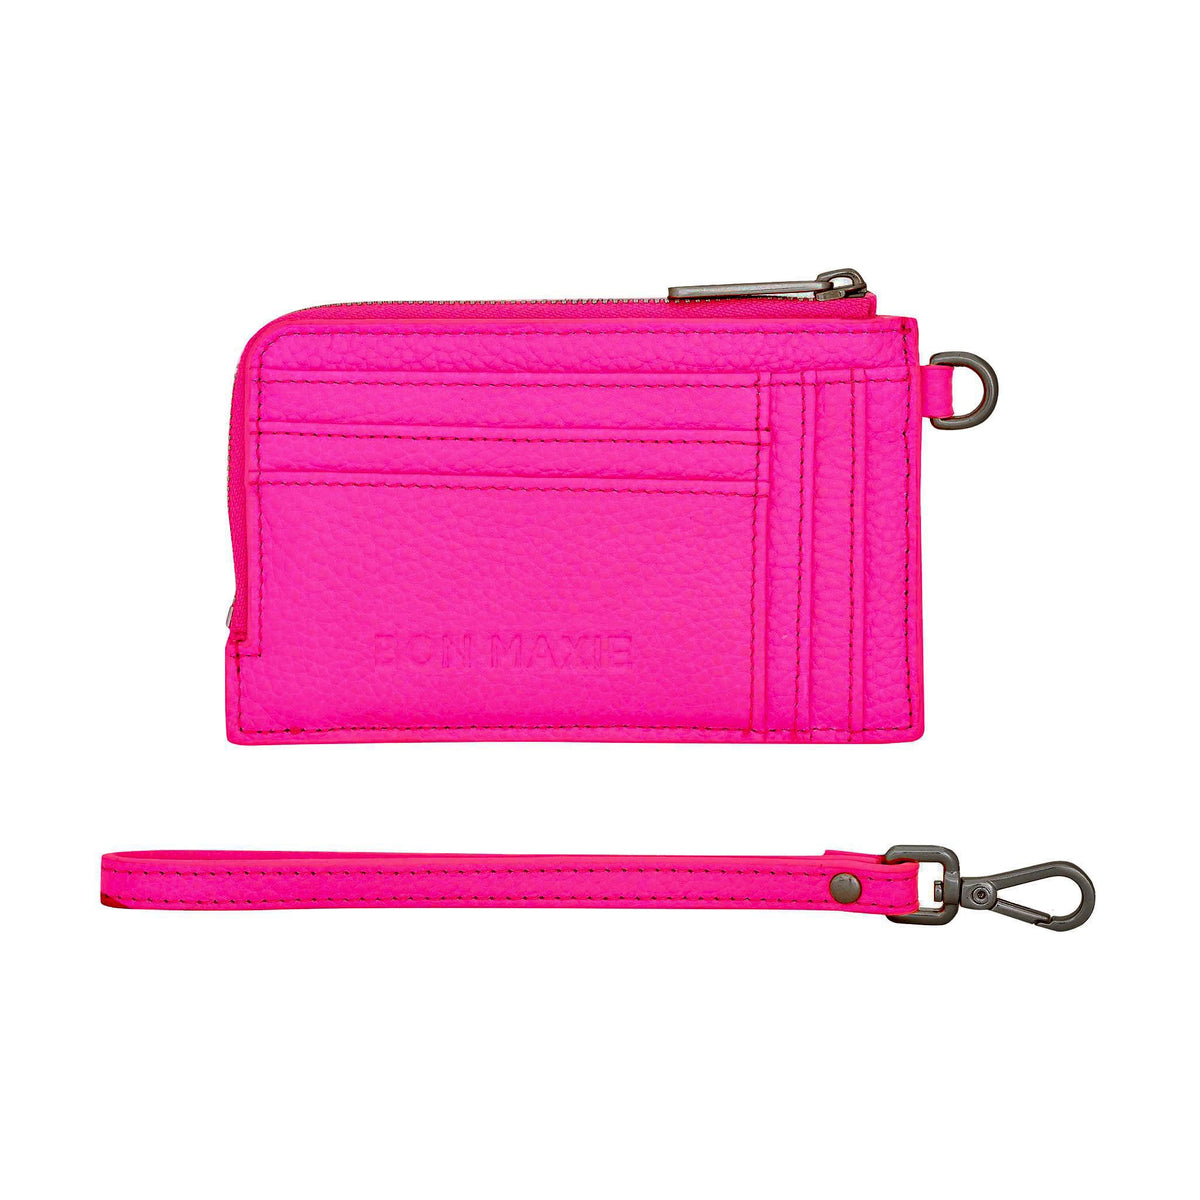 The Mini Wallet - Neon Pink